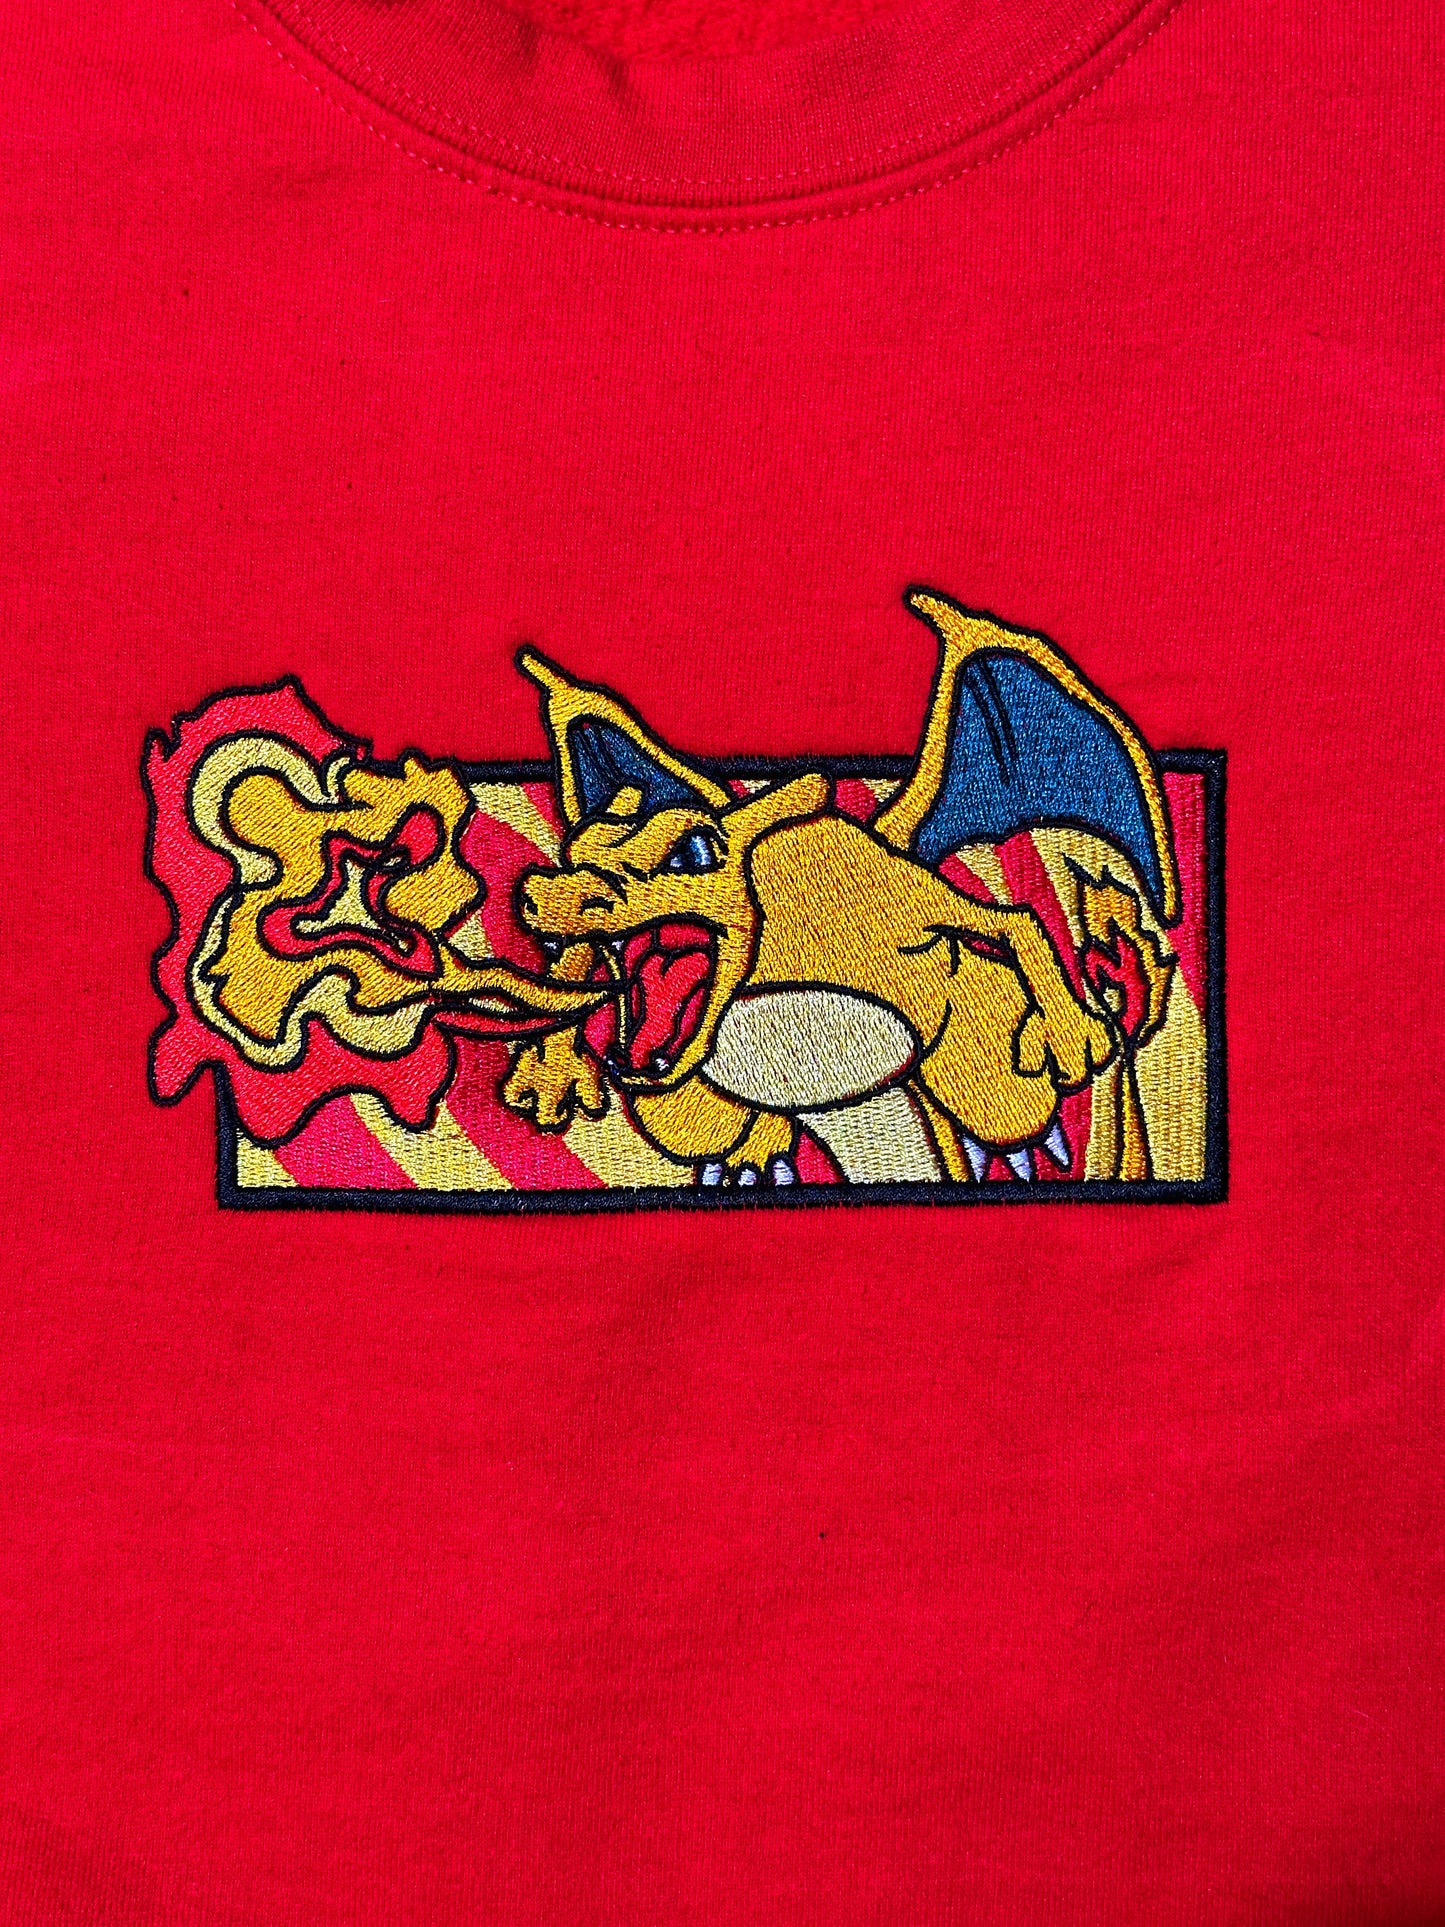 Fire Breathing Dragon | Front Design | Embroidery Apparel